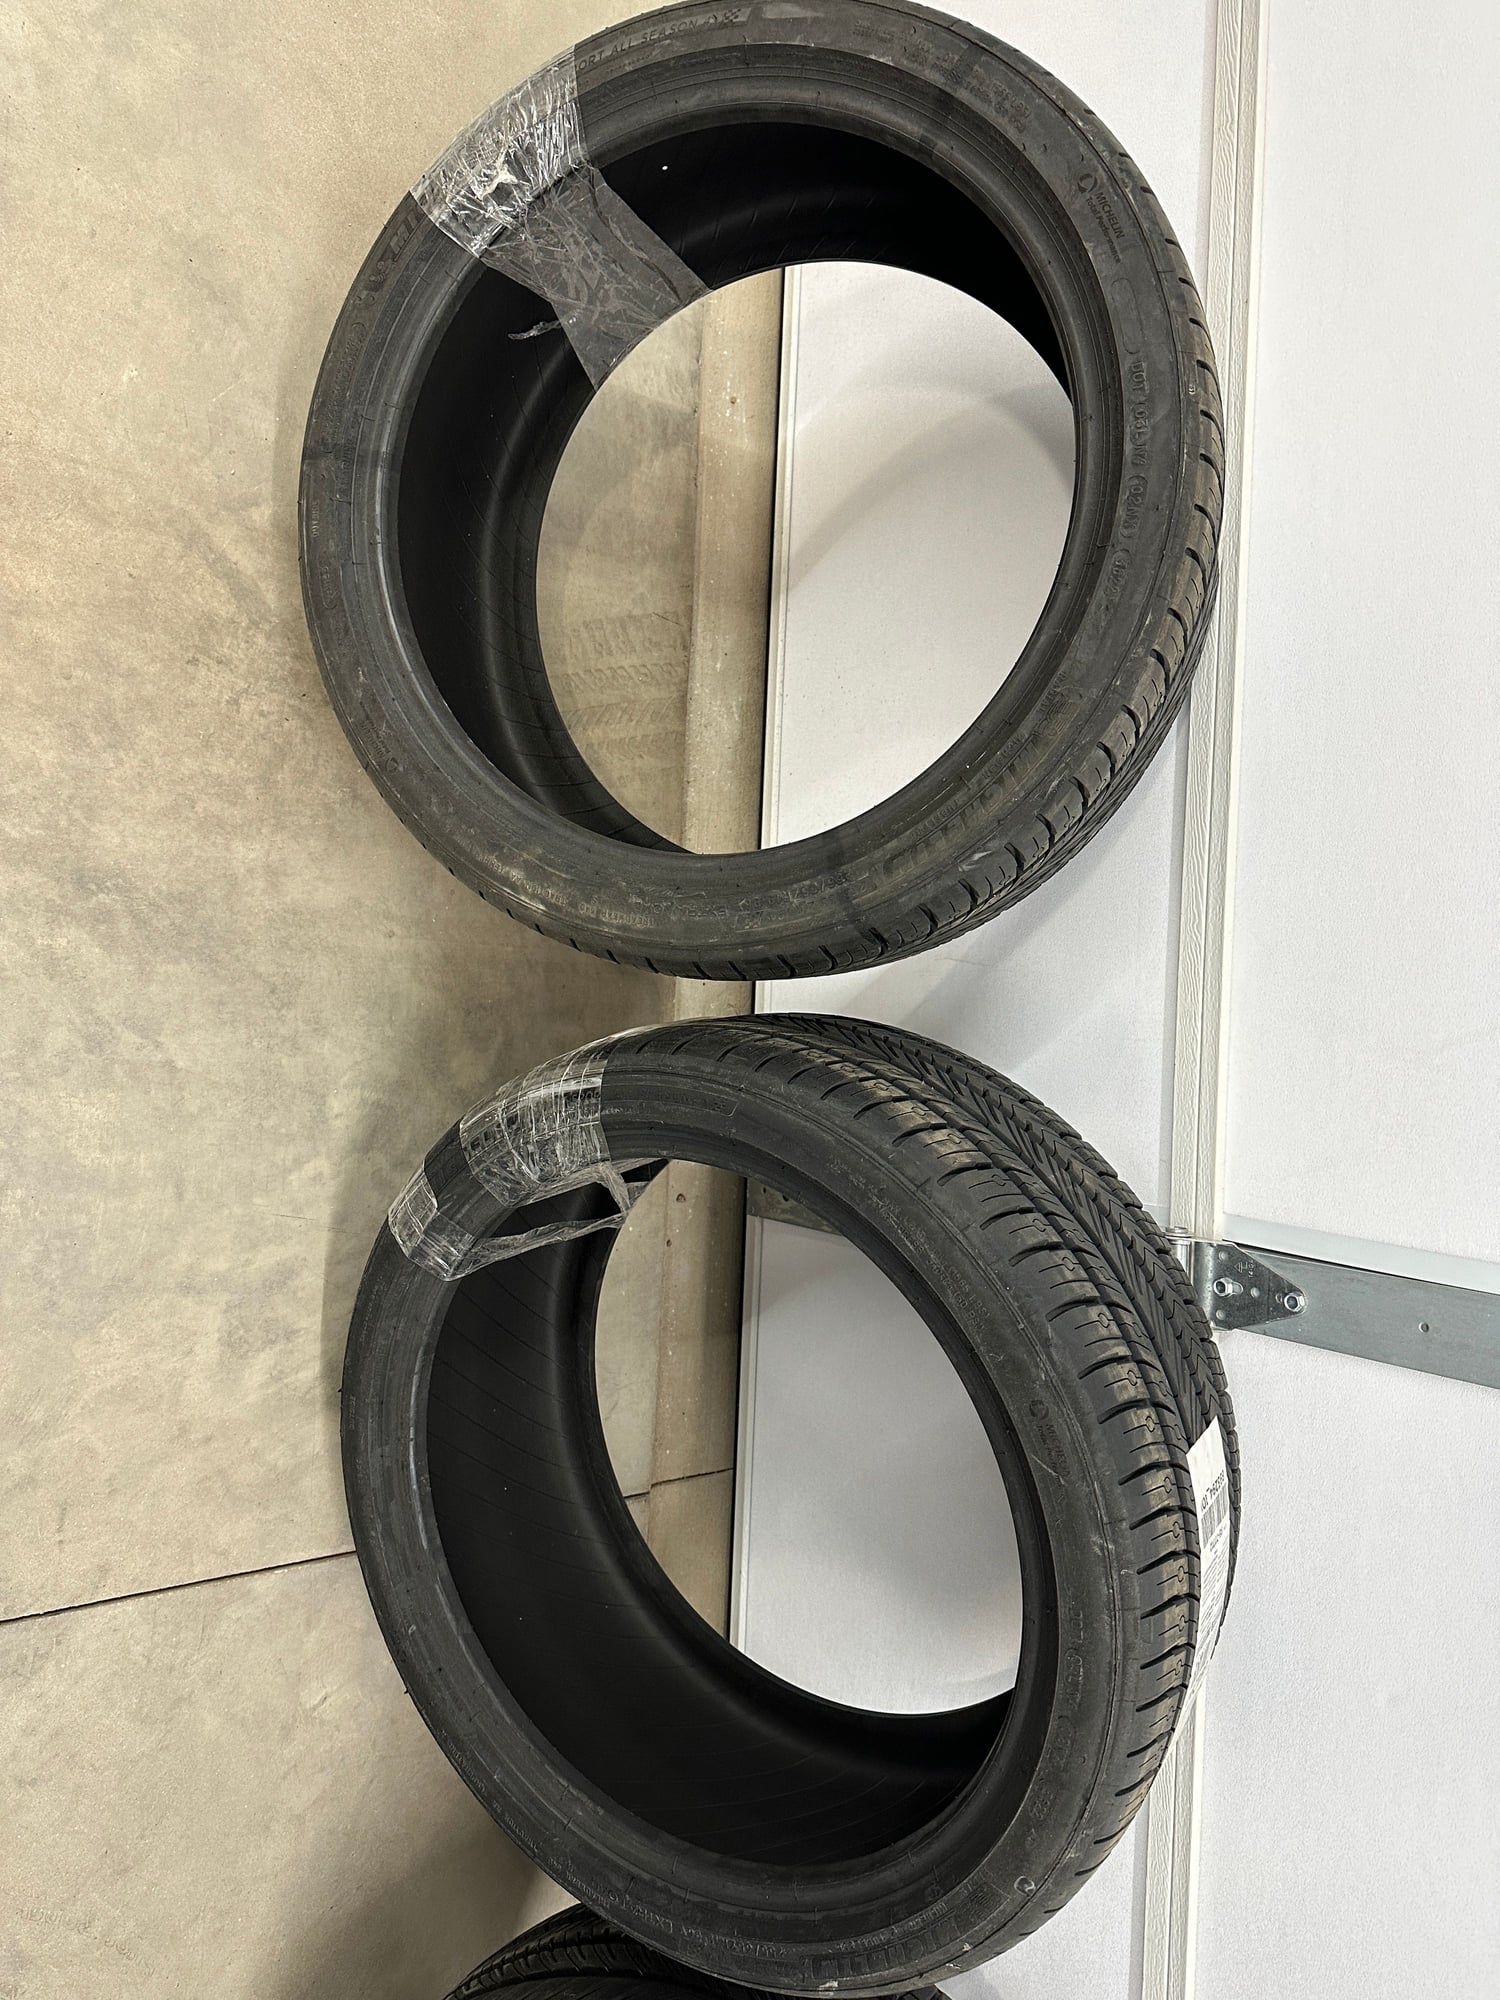 Wheels and Tires/Axles - Pilot Sport All Season 4. 255/35/19 & 275/35/19 - New - 2019 to 2021 Mercedes-Benz C63 AMG S - Clovis, NM 88101, United States